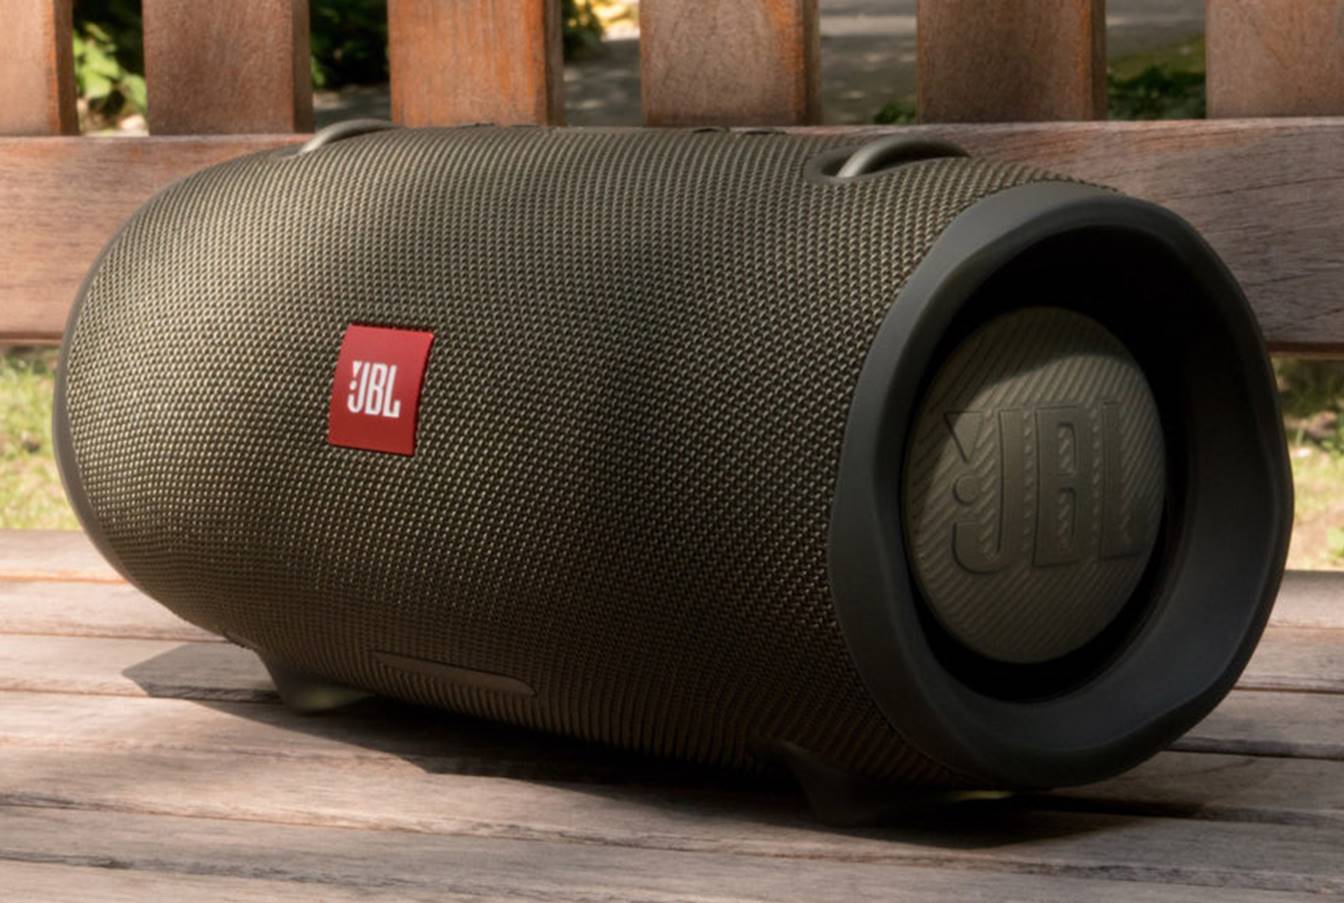 The Best Bluetooth Speakers For Bass of (Summer) 2022: Buying Guide